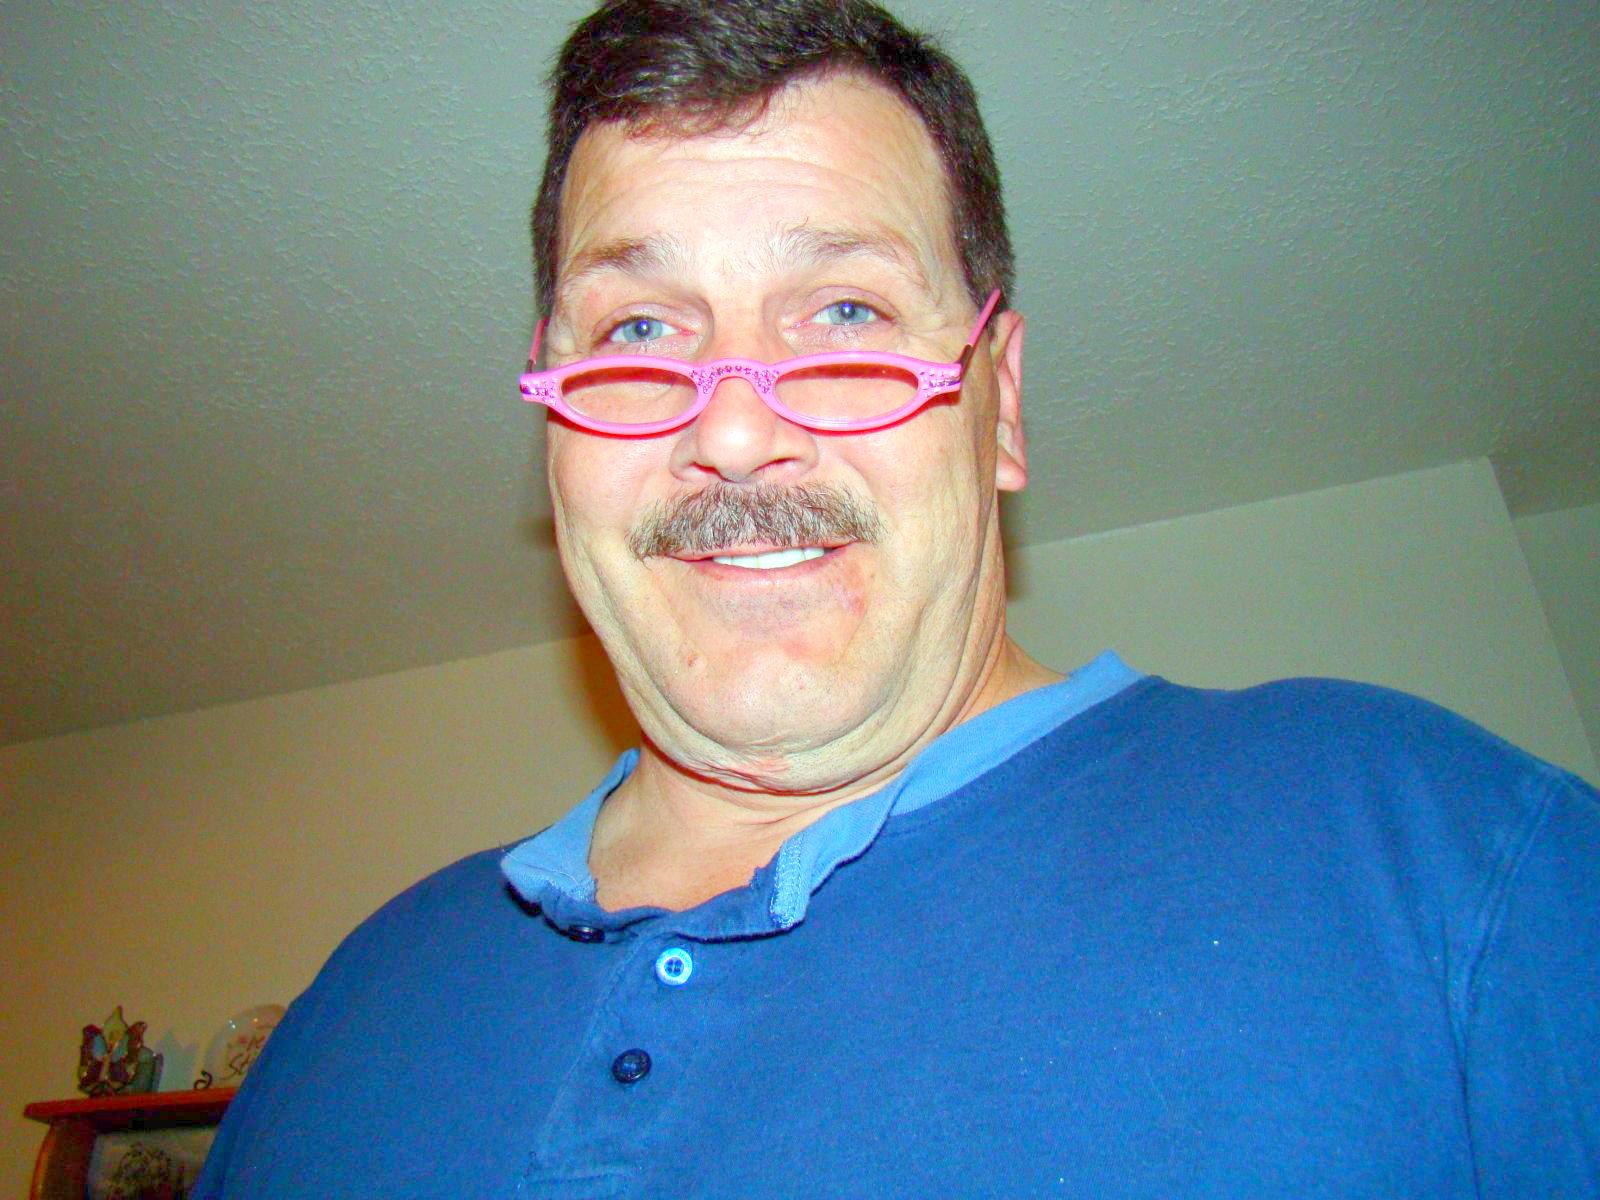 a man with bright pink glasses smiling for the camera